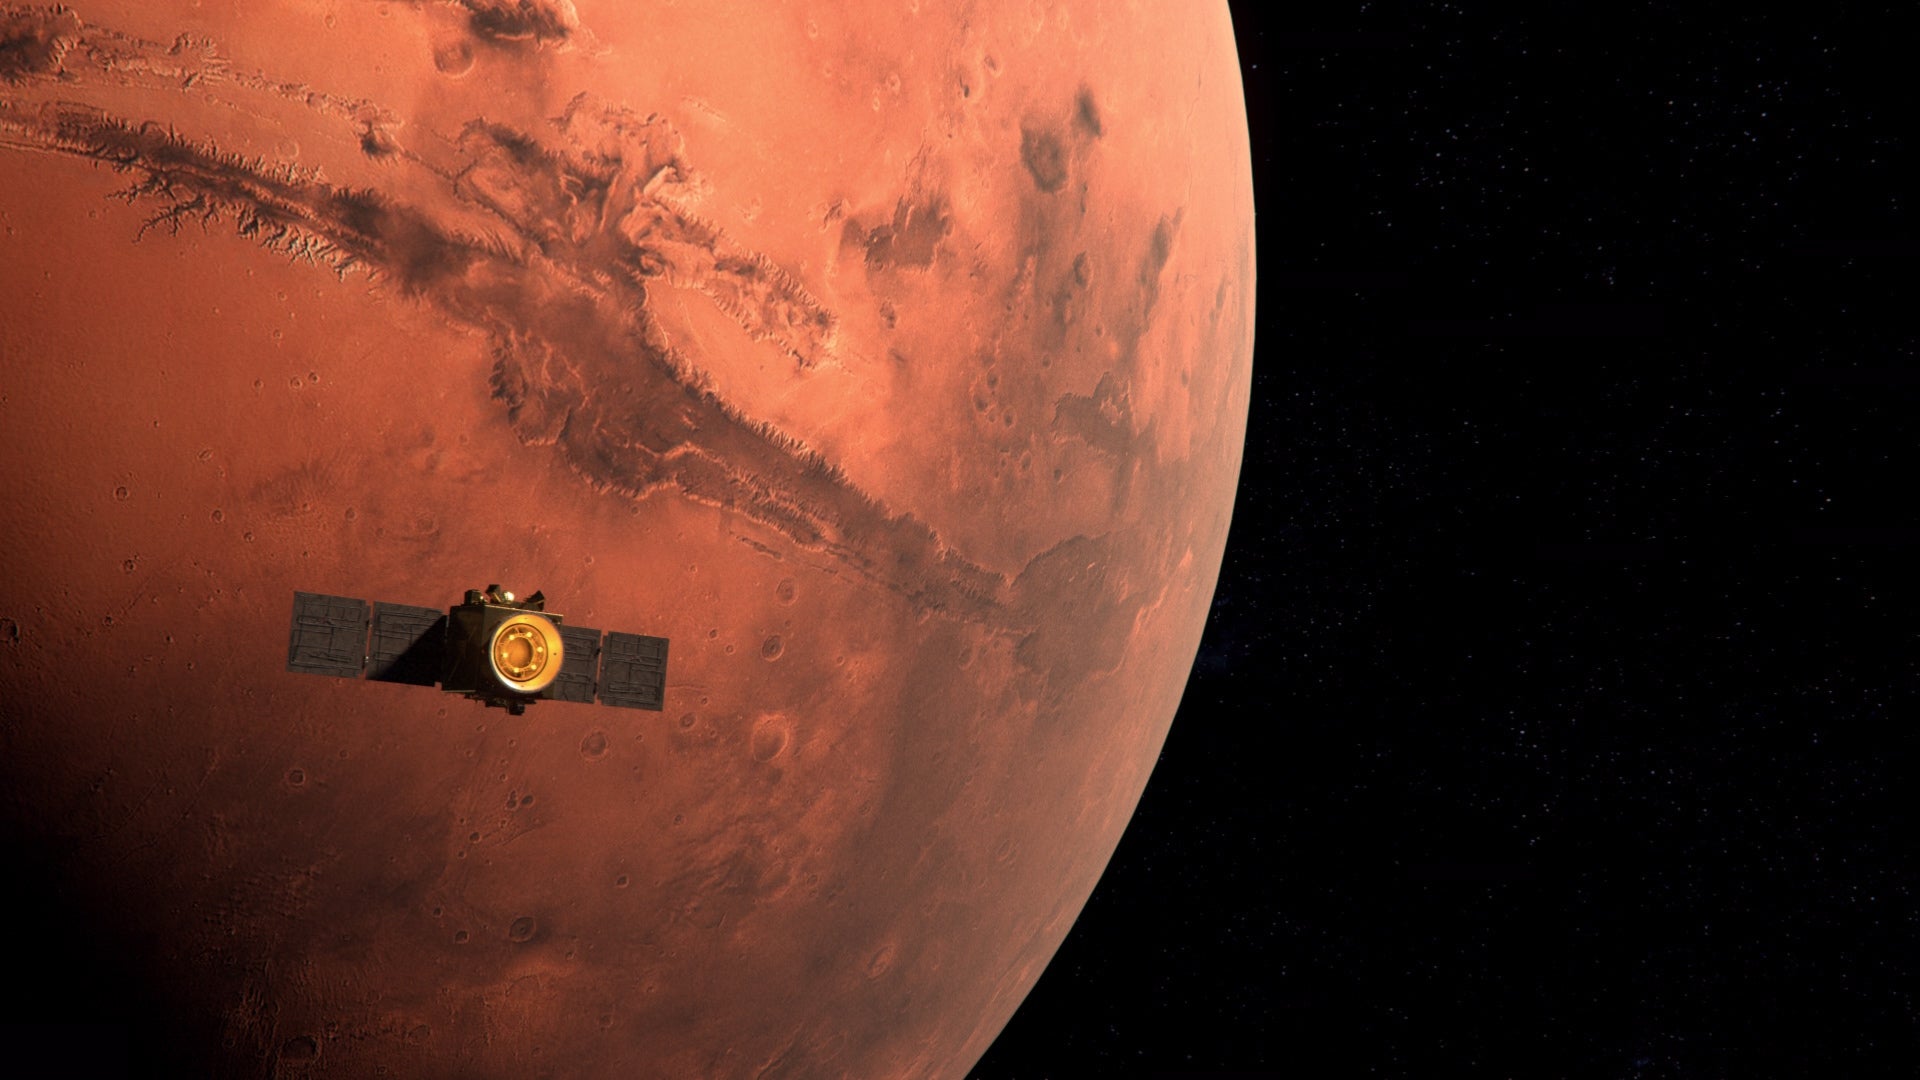 An illustration of the arrival of the Hope Probe to Mars orbit